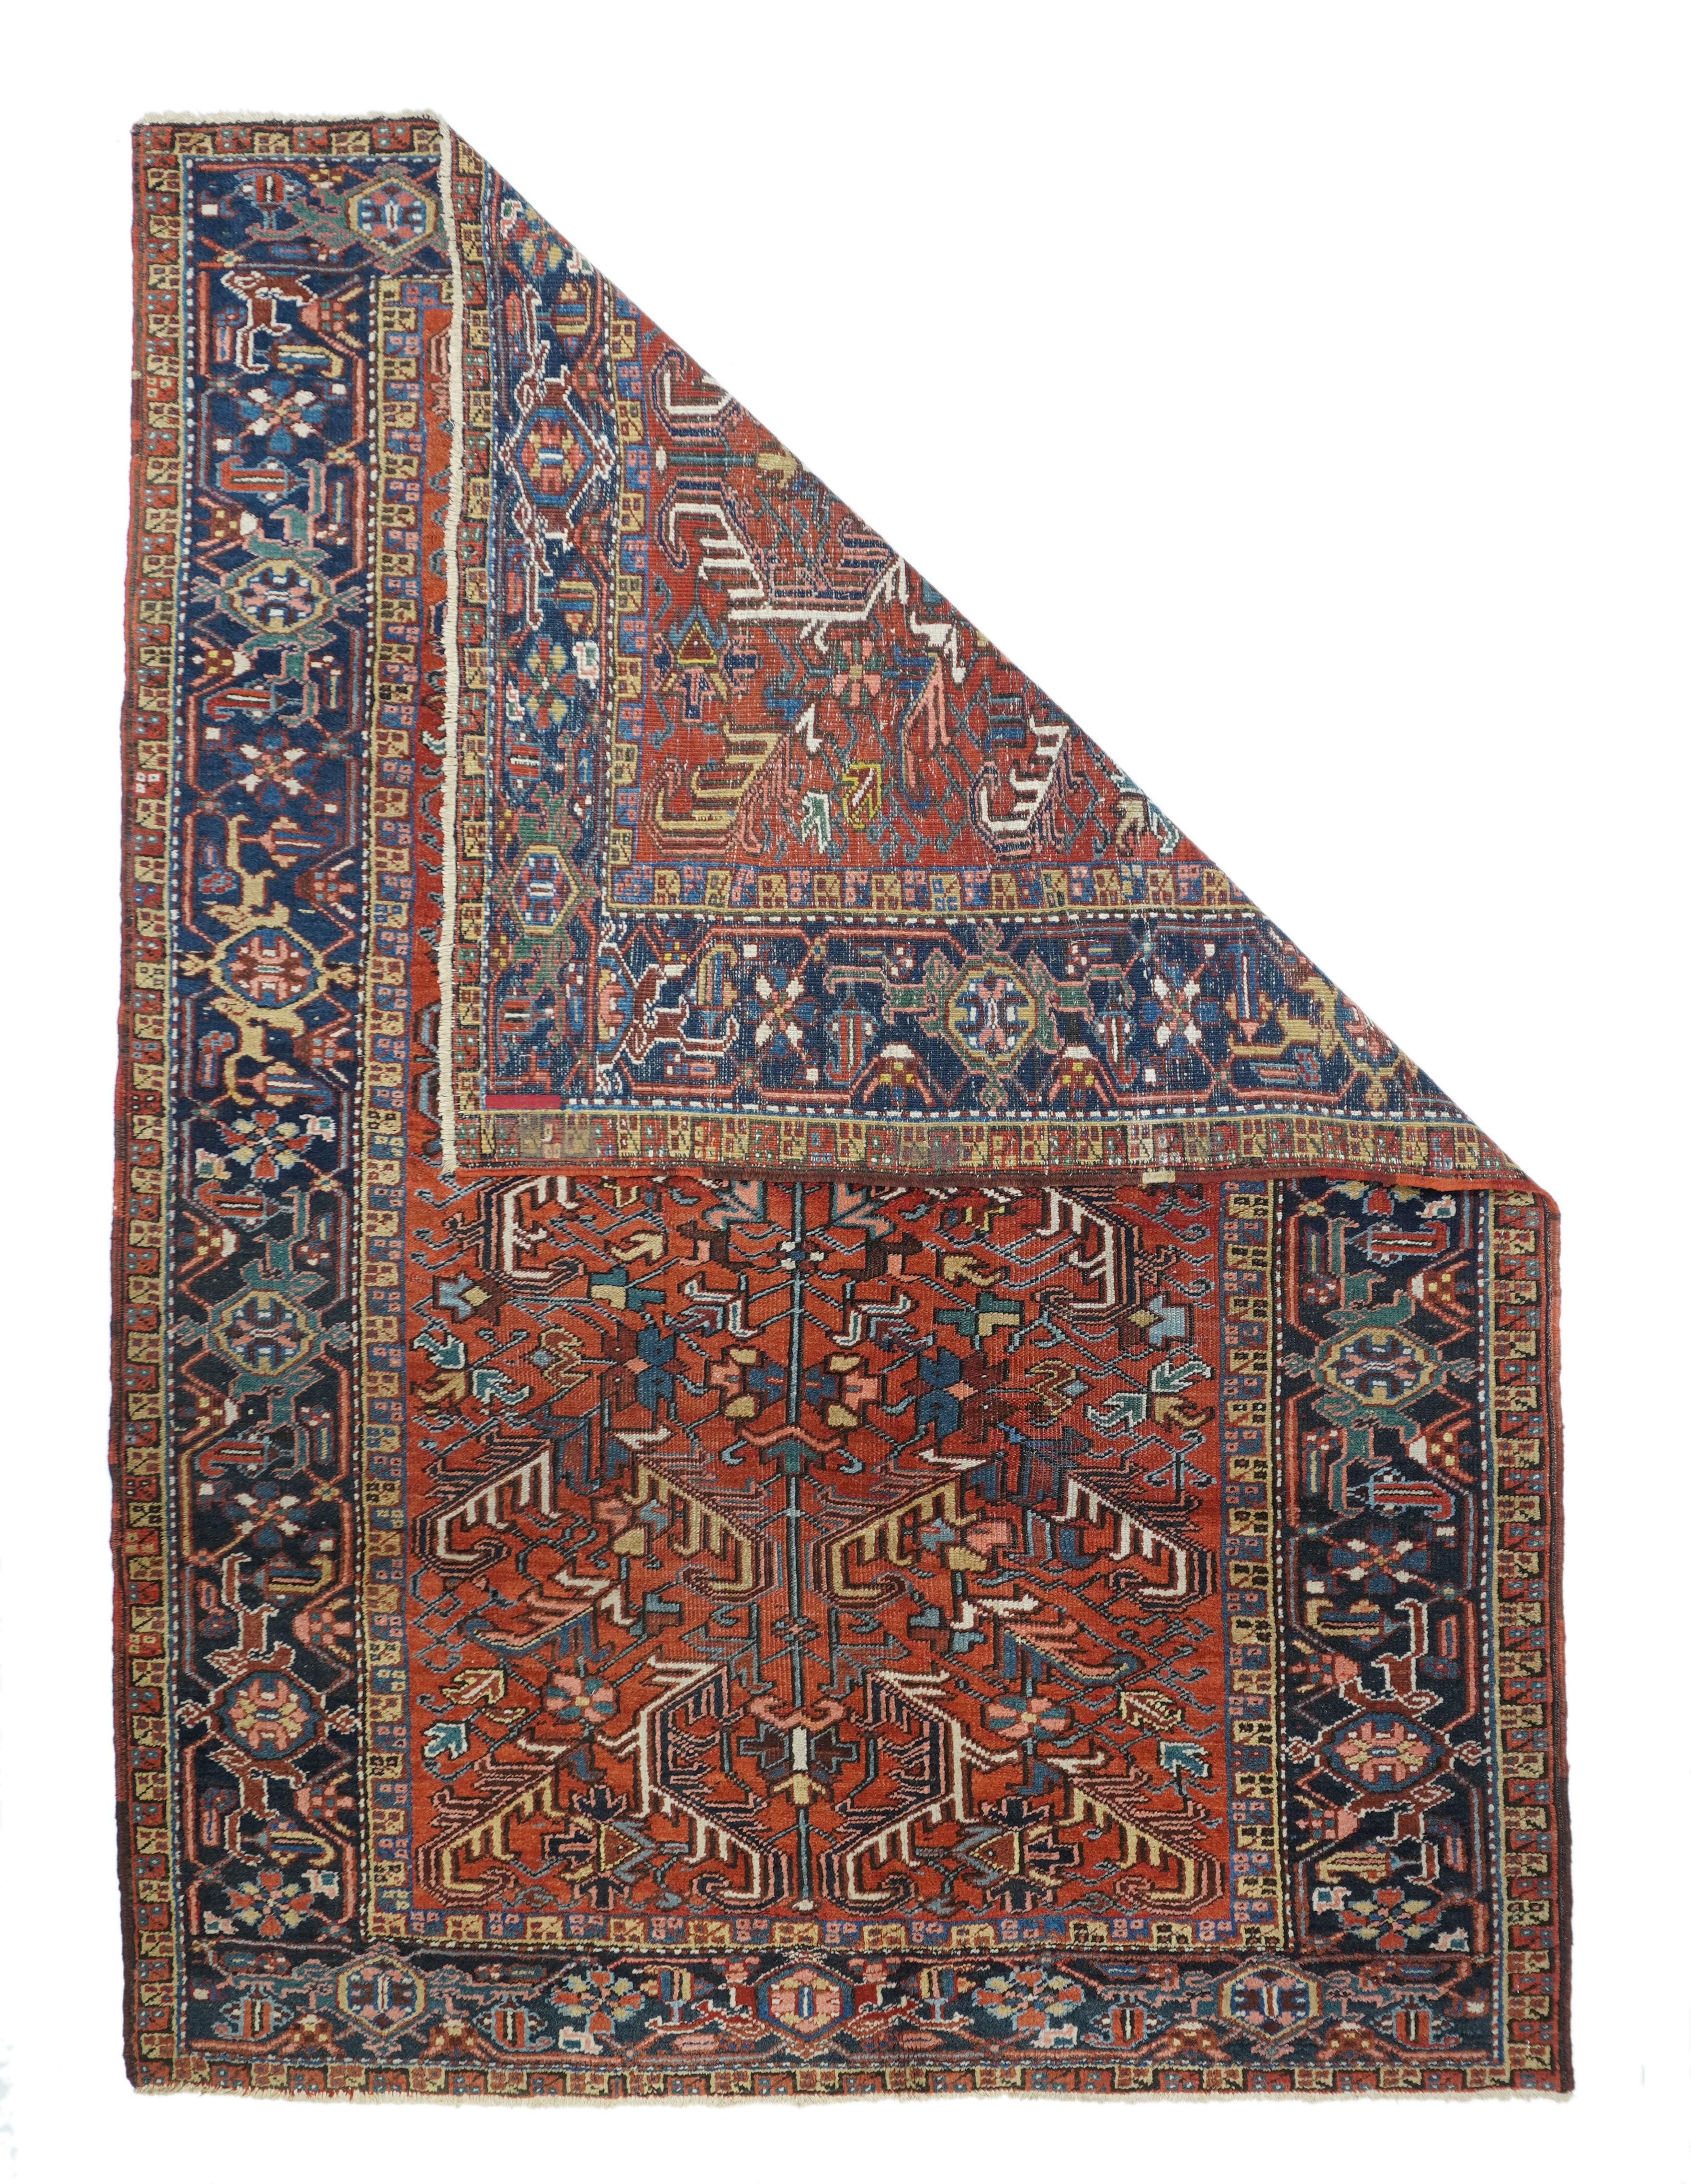 Vintage Heriz rug 6'2'' x 8'9''. Lots of bent bitonal leaves here, with straw mustard and ecru details, and a central multi-petal fringed octagon. Rust-red field shows small areas of slight wear. Touches of dark blue, dark red and teal. Charcoal